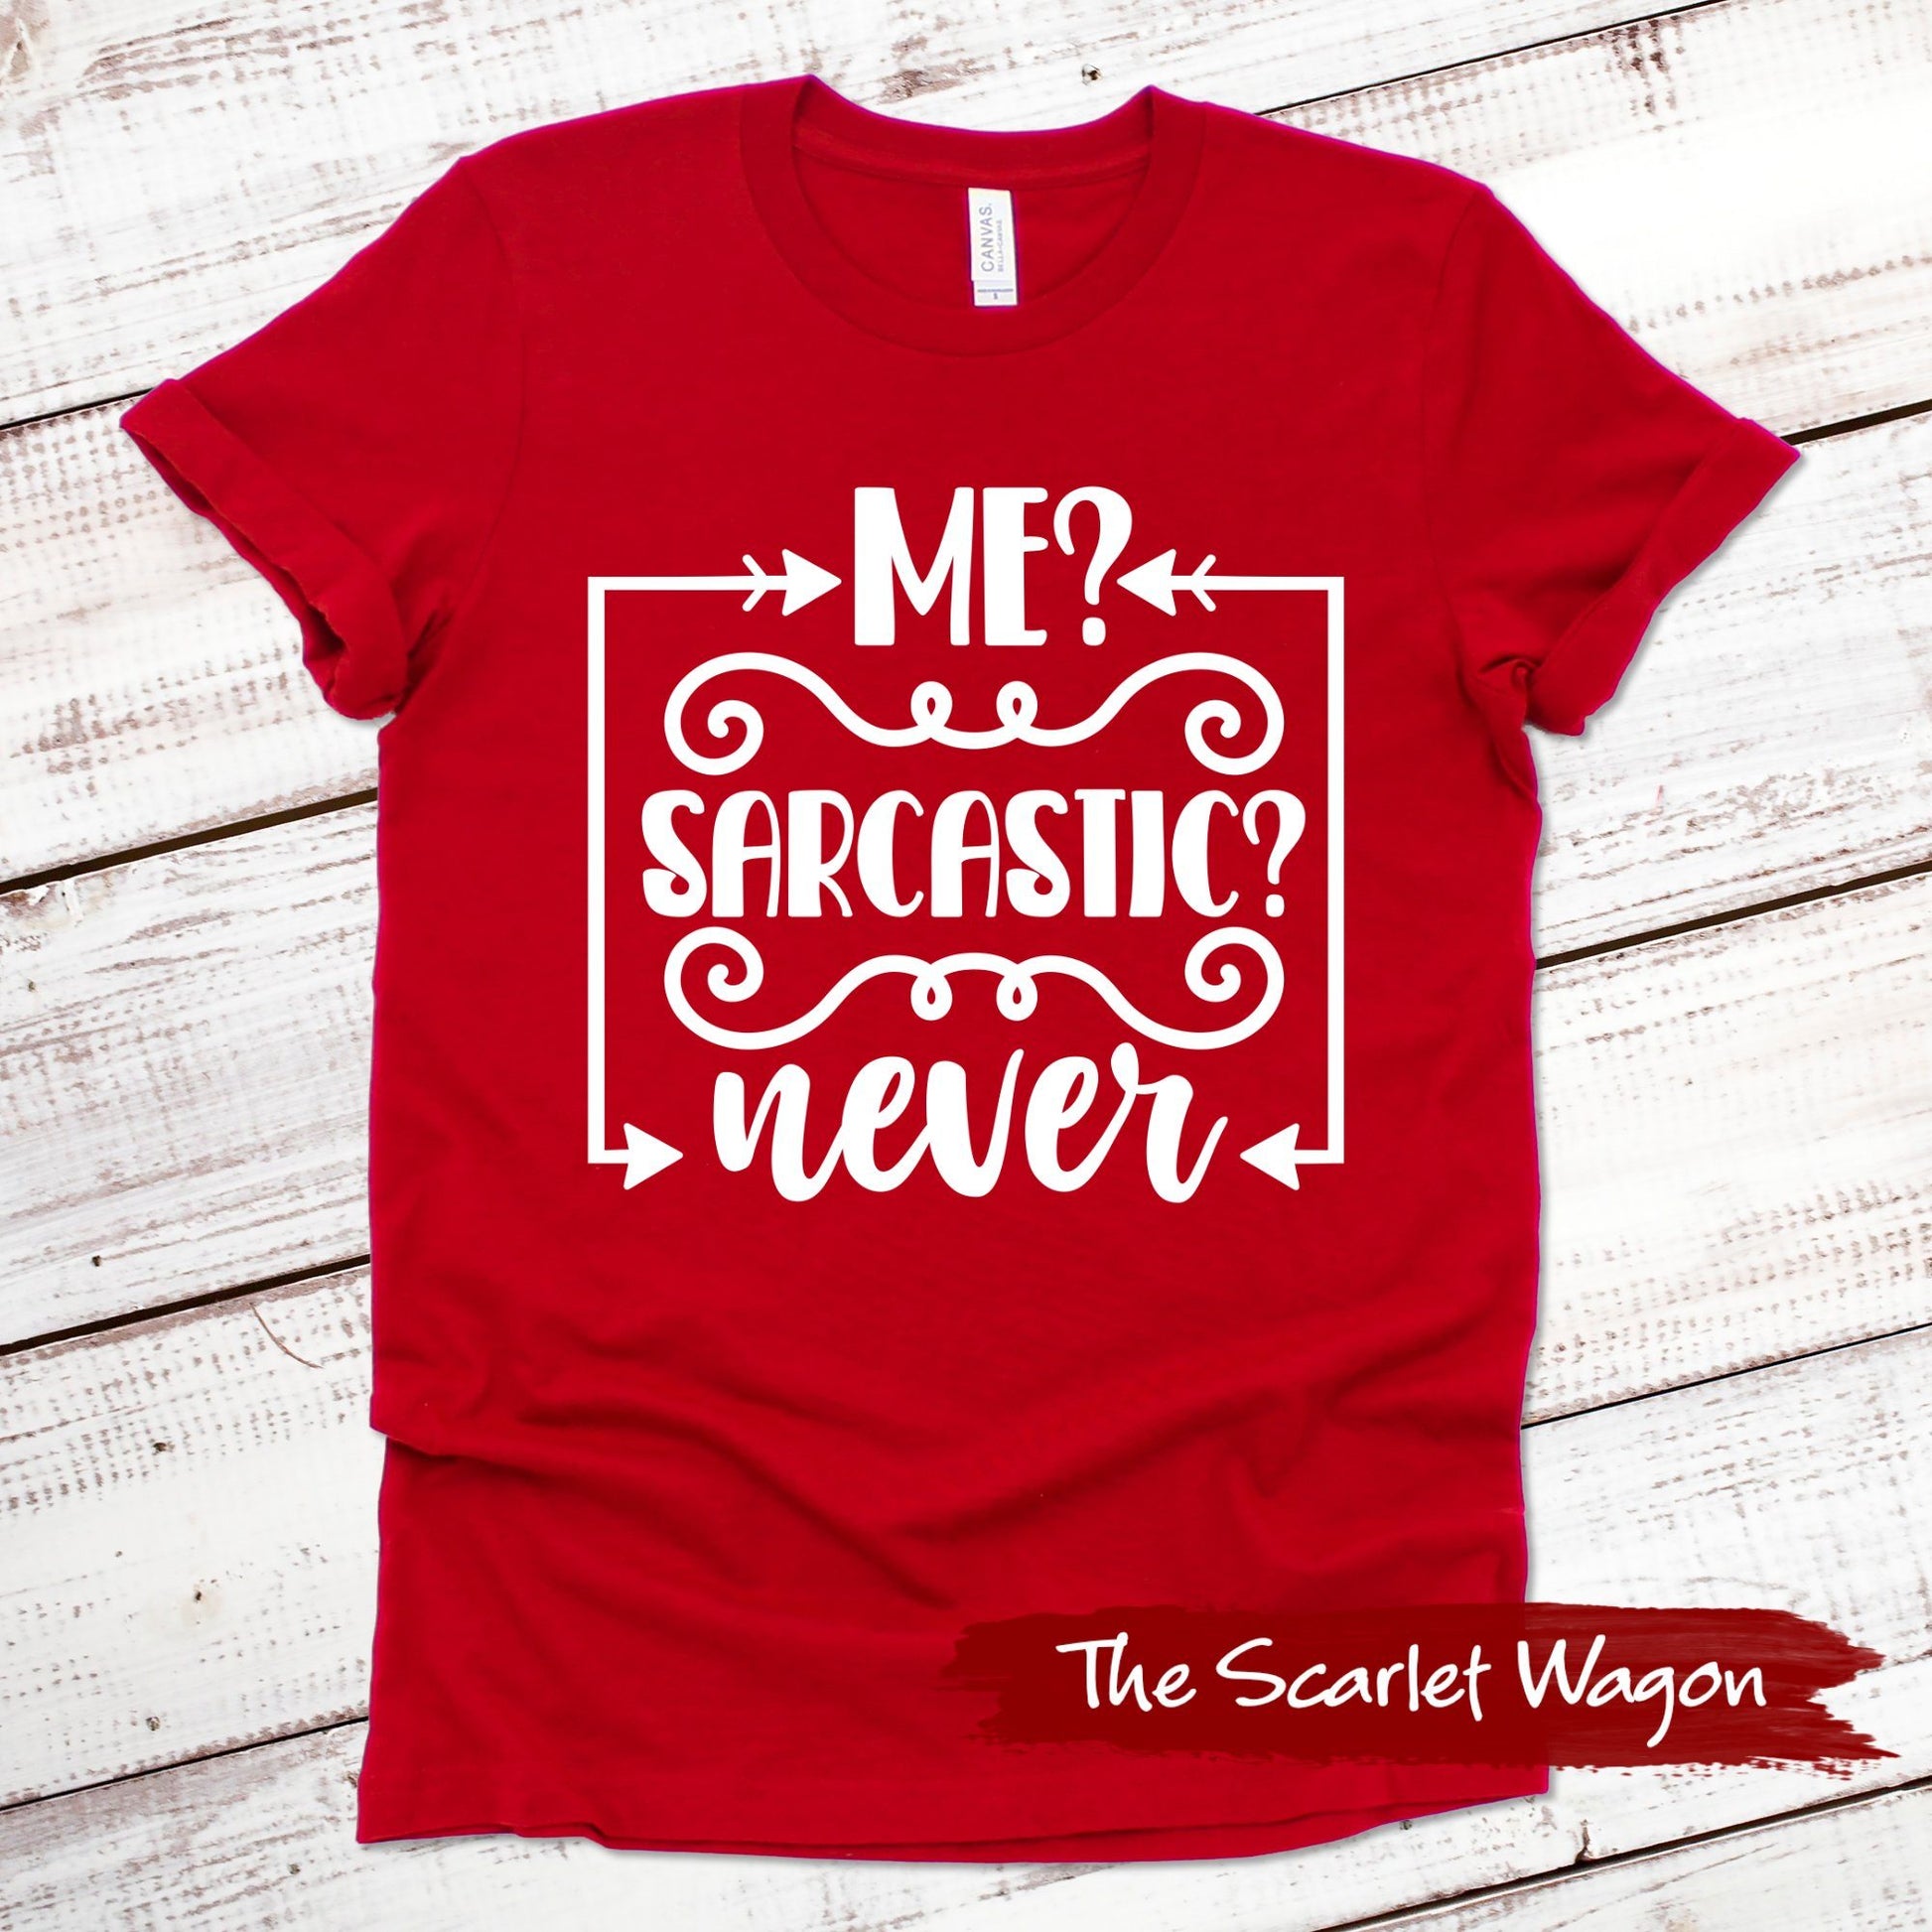 Me? Sarcastic? Never Funny Shirt Scarlet Wagon Red XS 